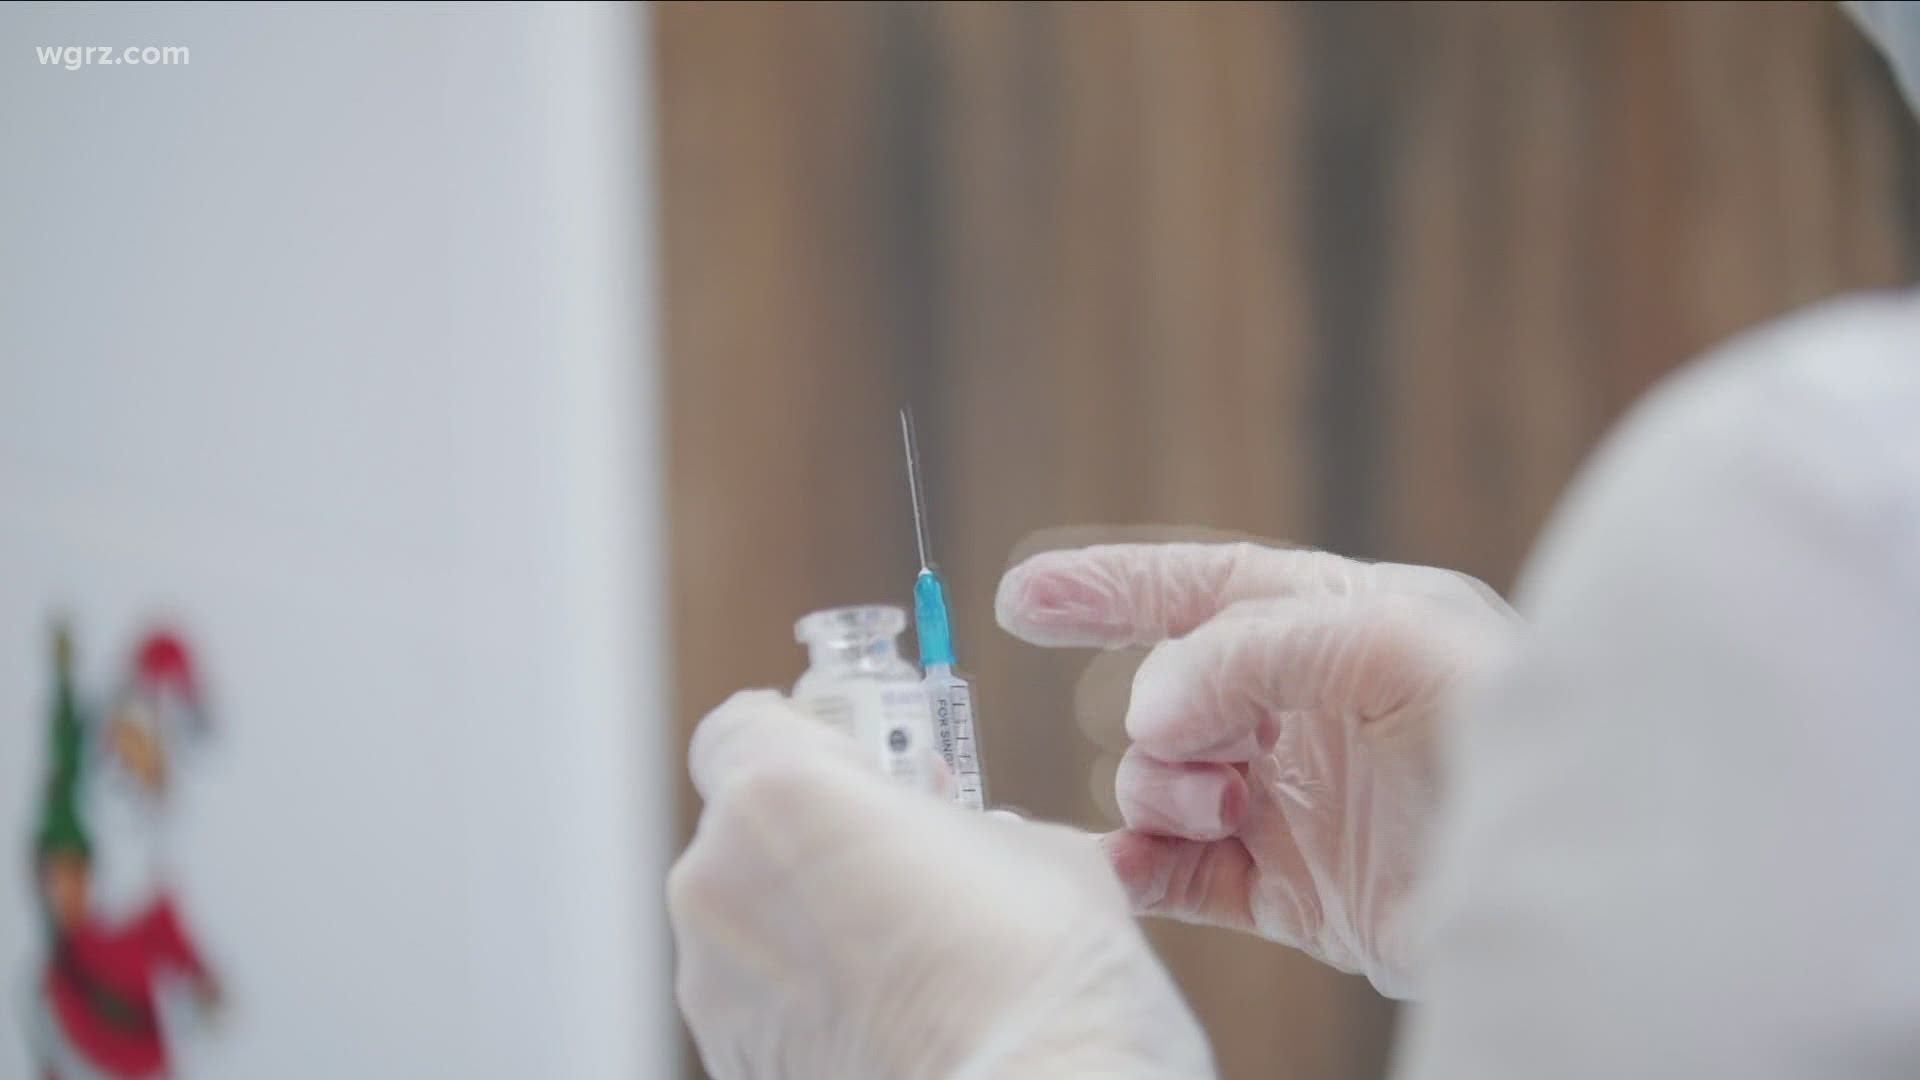 About 58 million Americans have been fully vaccinated for Covid-19. But does that mean those individuals have received their last shot?